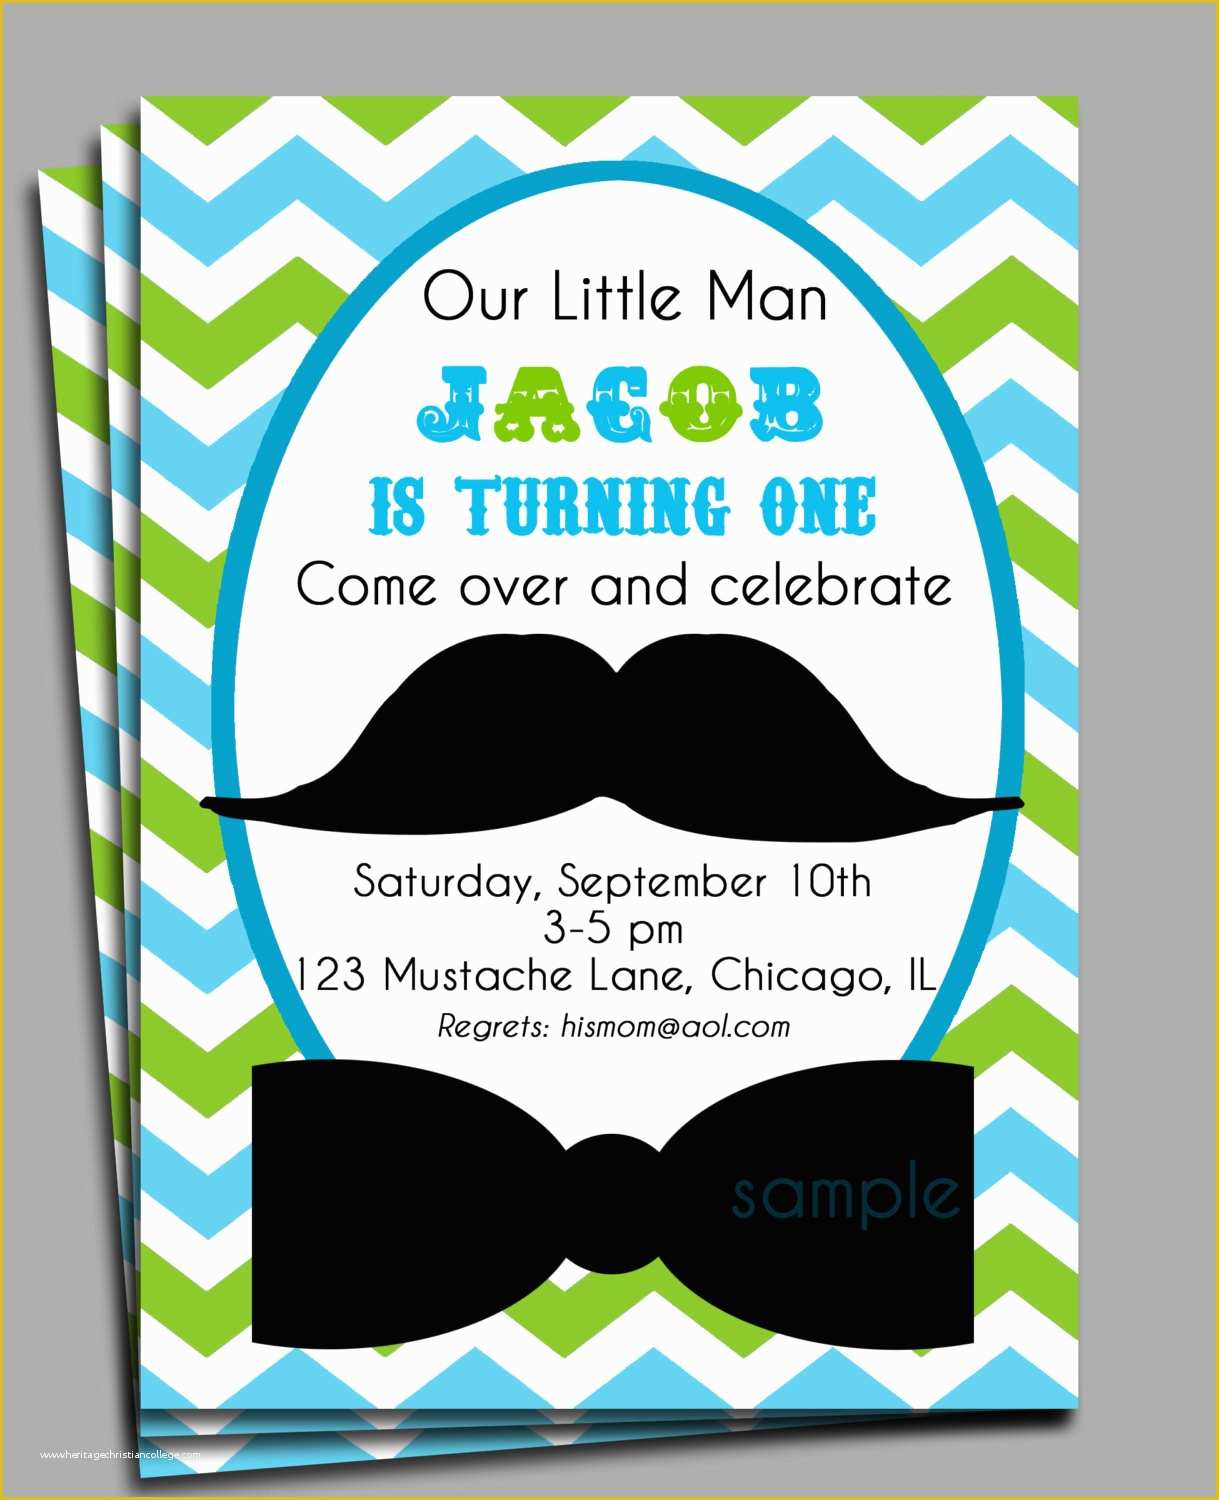 Little Man Birthday Invitation Template Free Of Little Man Mustache Invitation Printable or Printed with Free